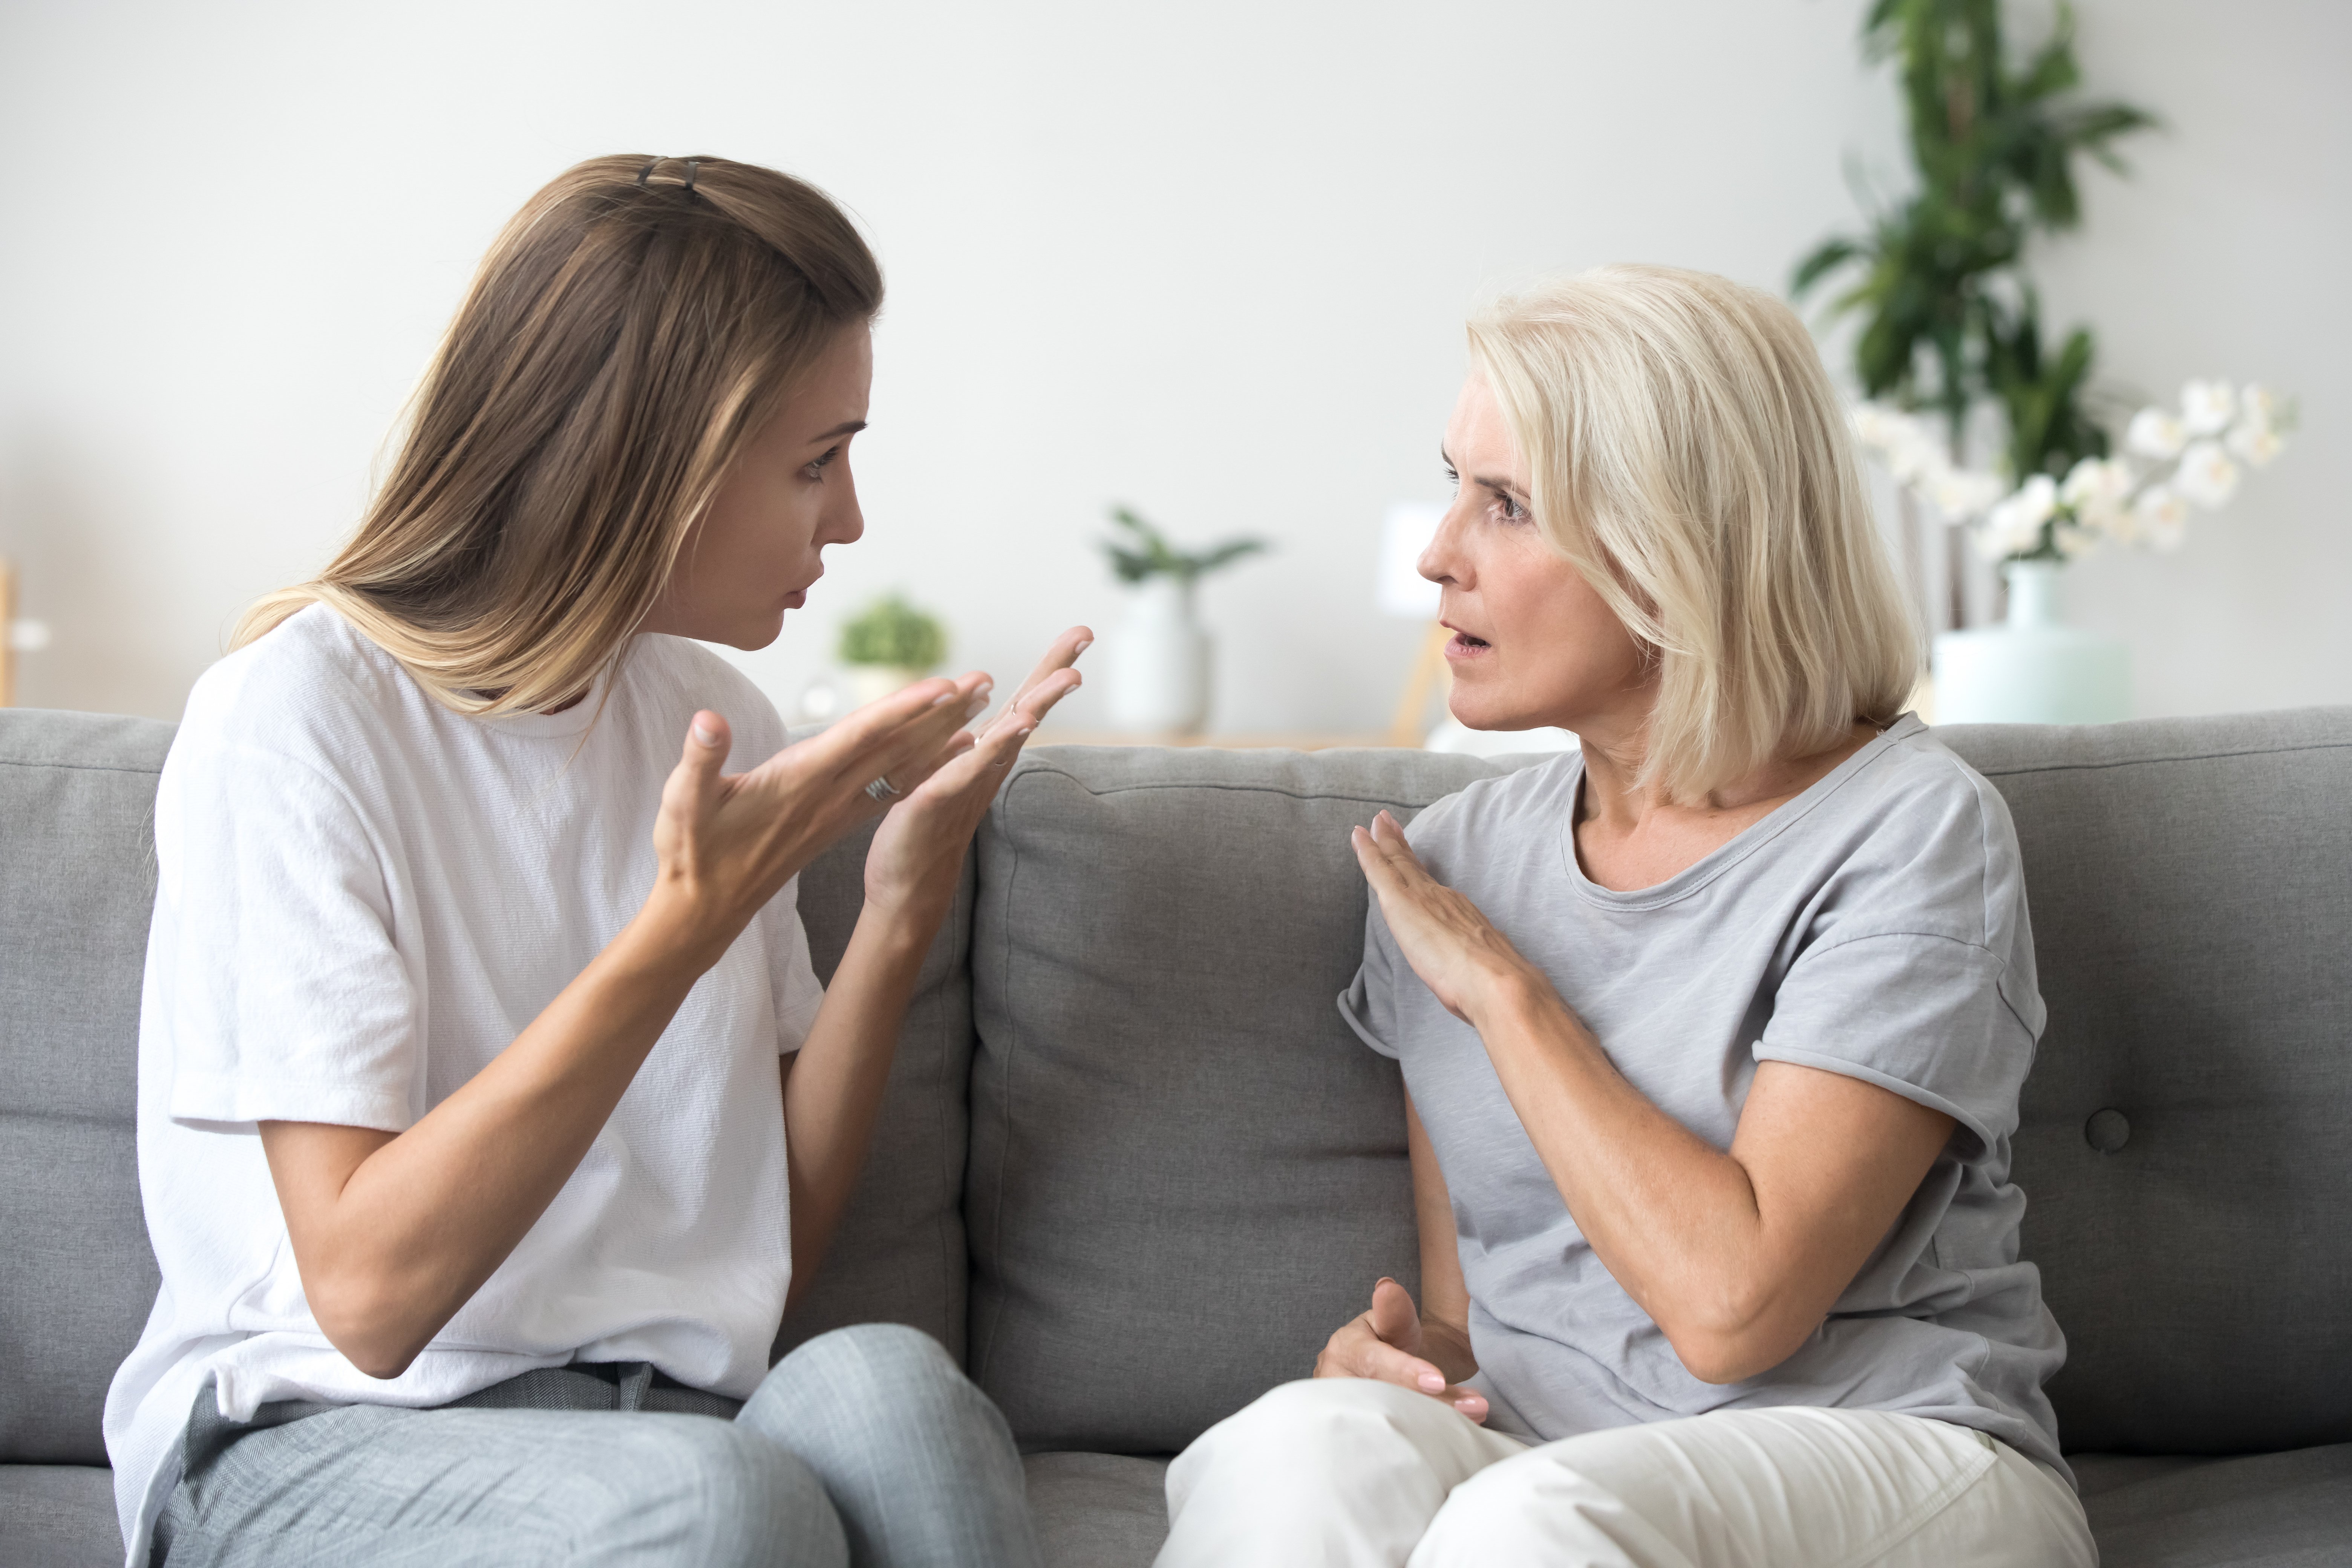 Elderly woman arguing with younger woman. | Source: Shutterstock